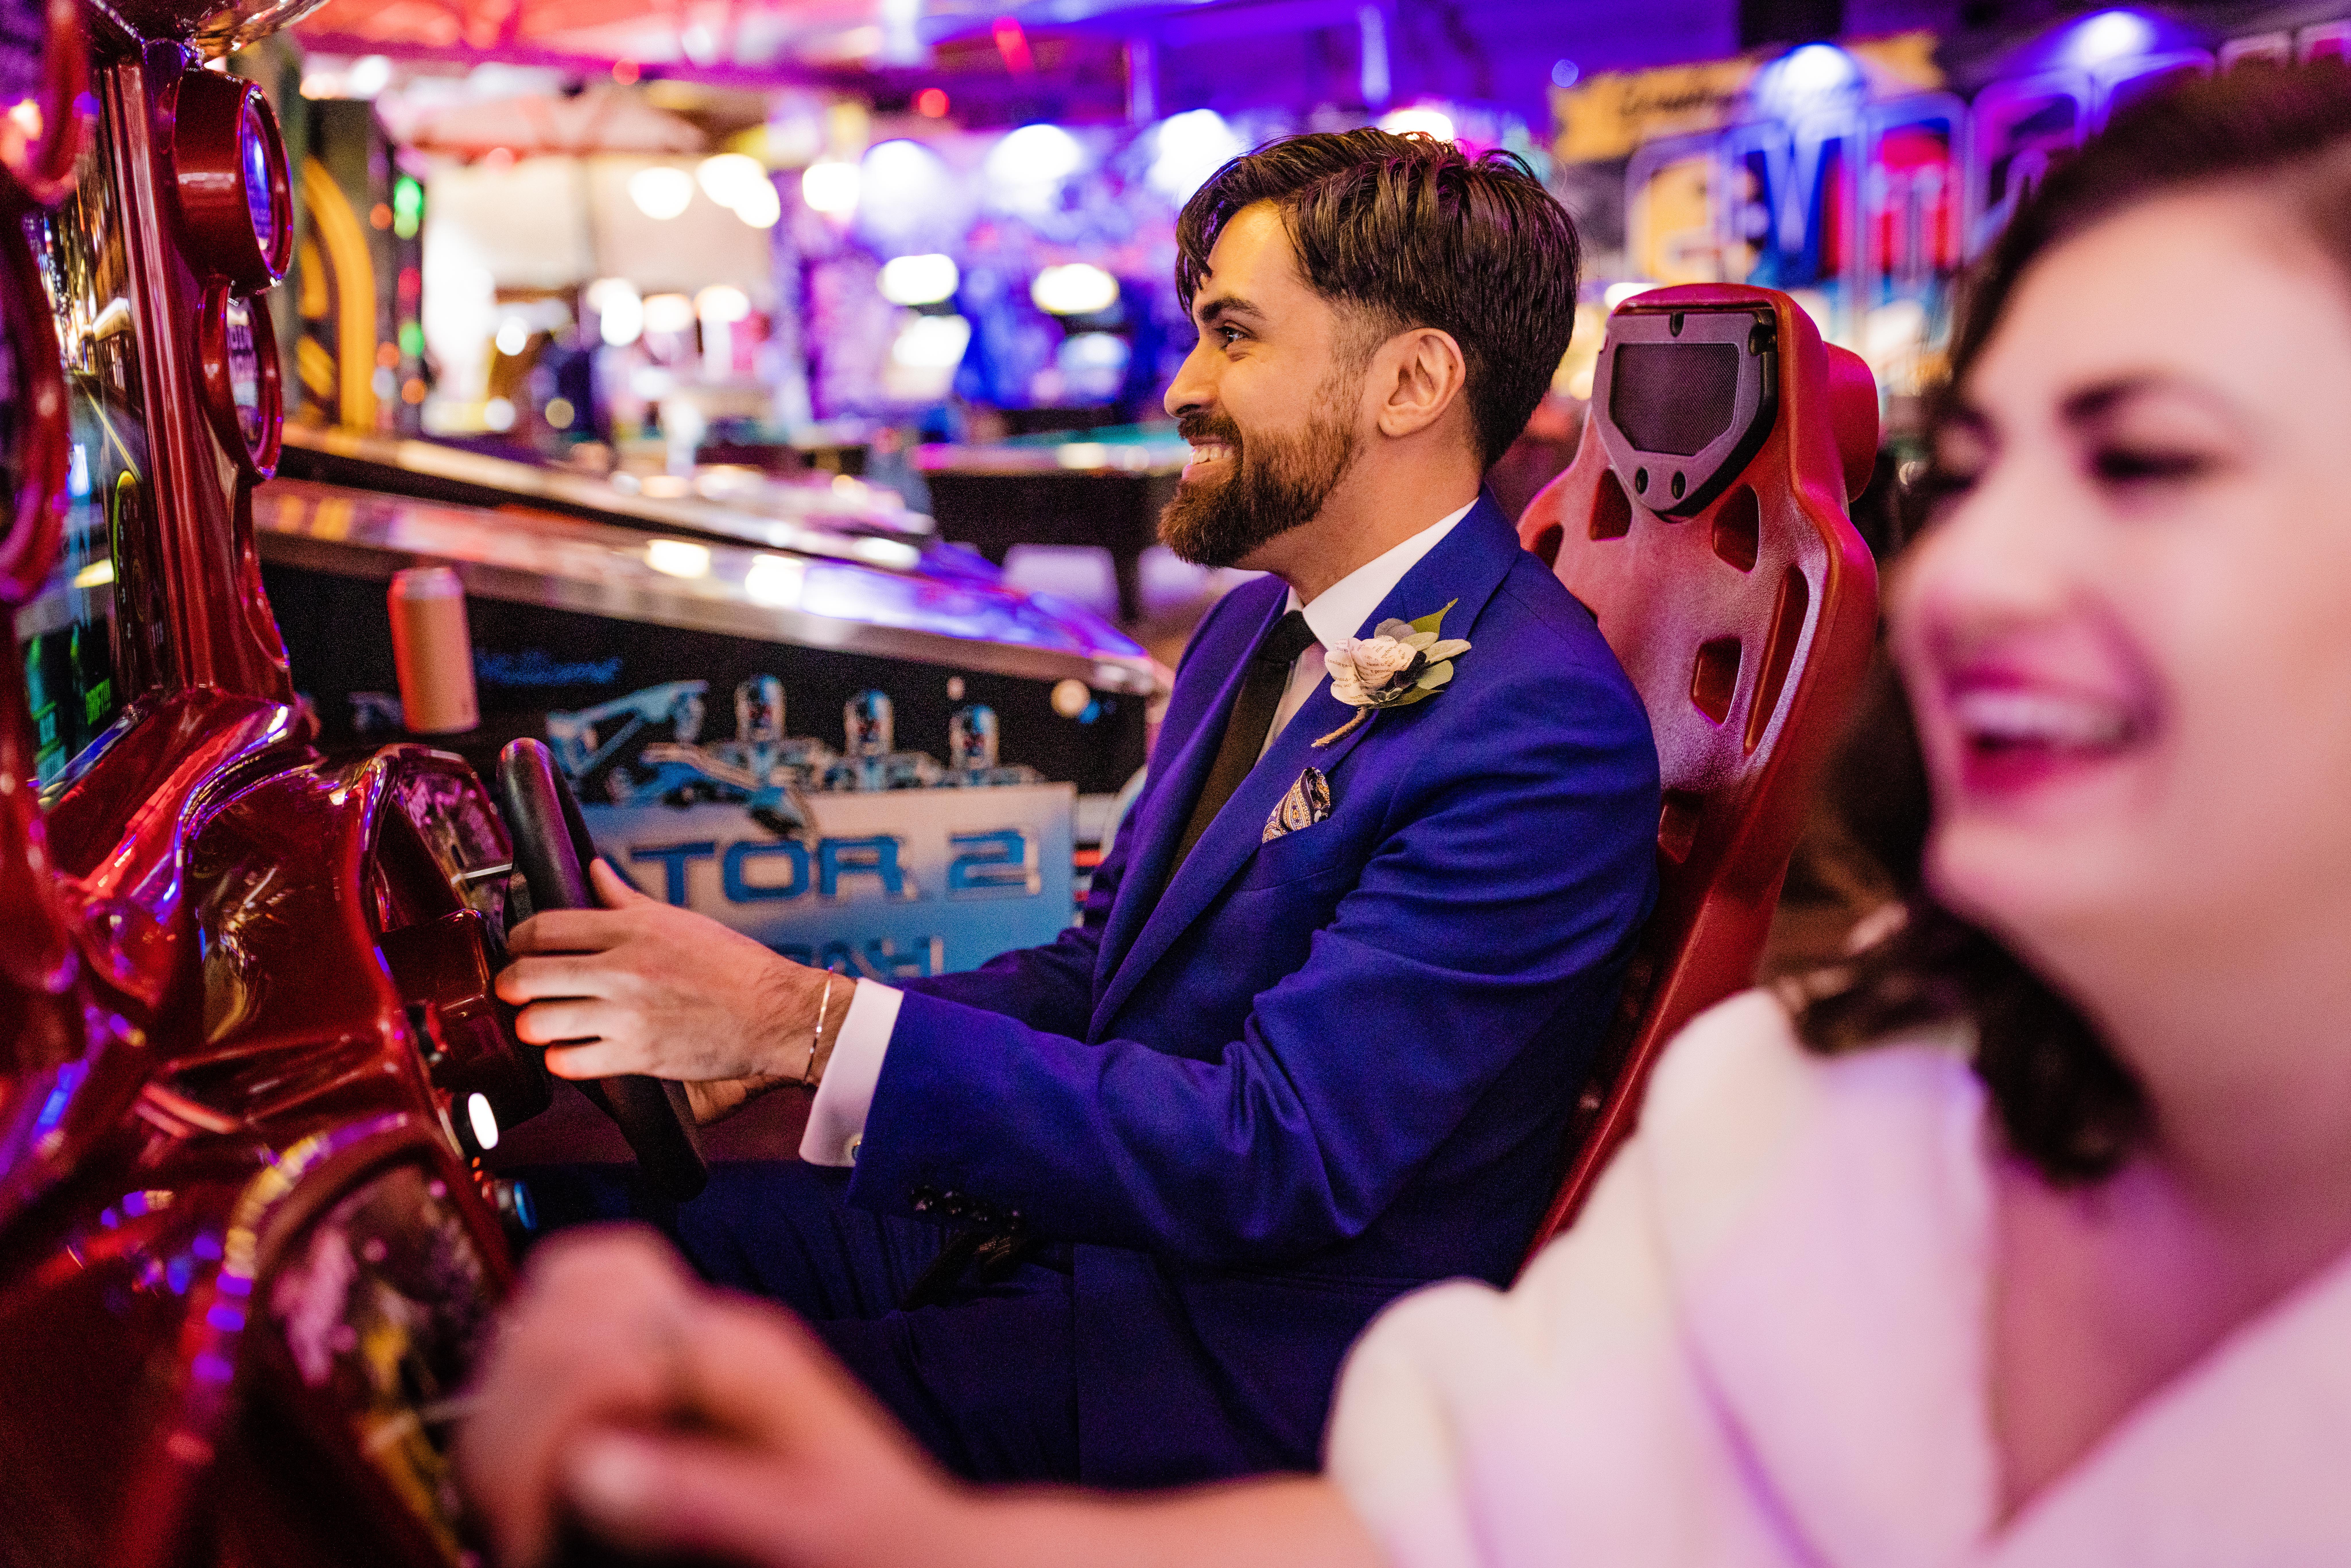 Groom playing driving video game